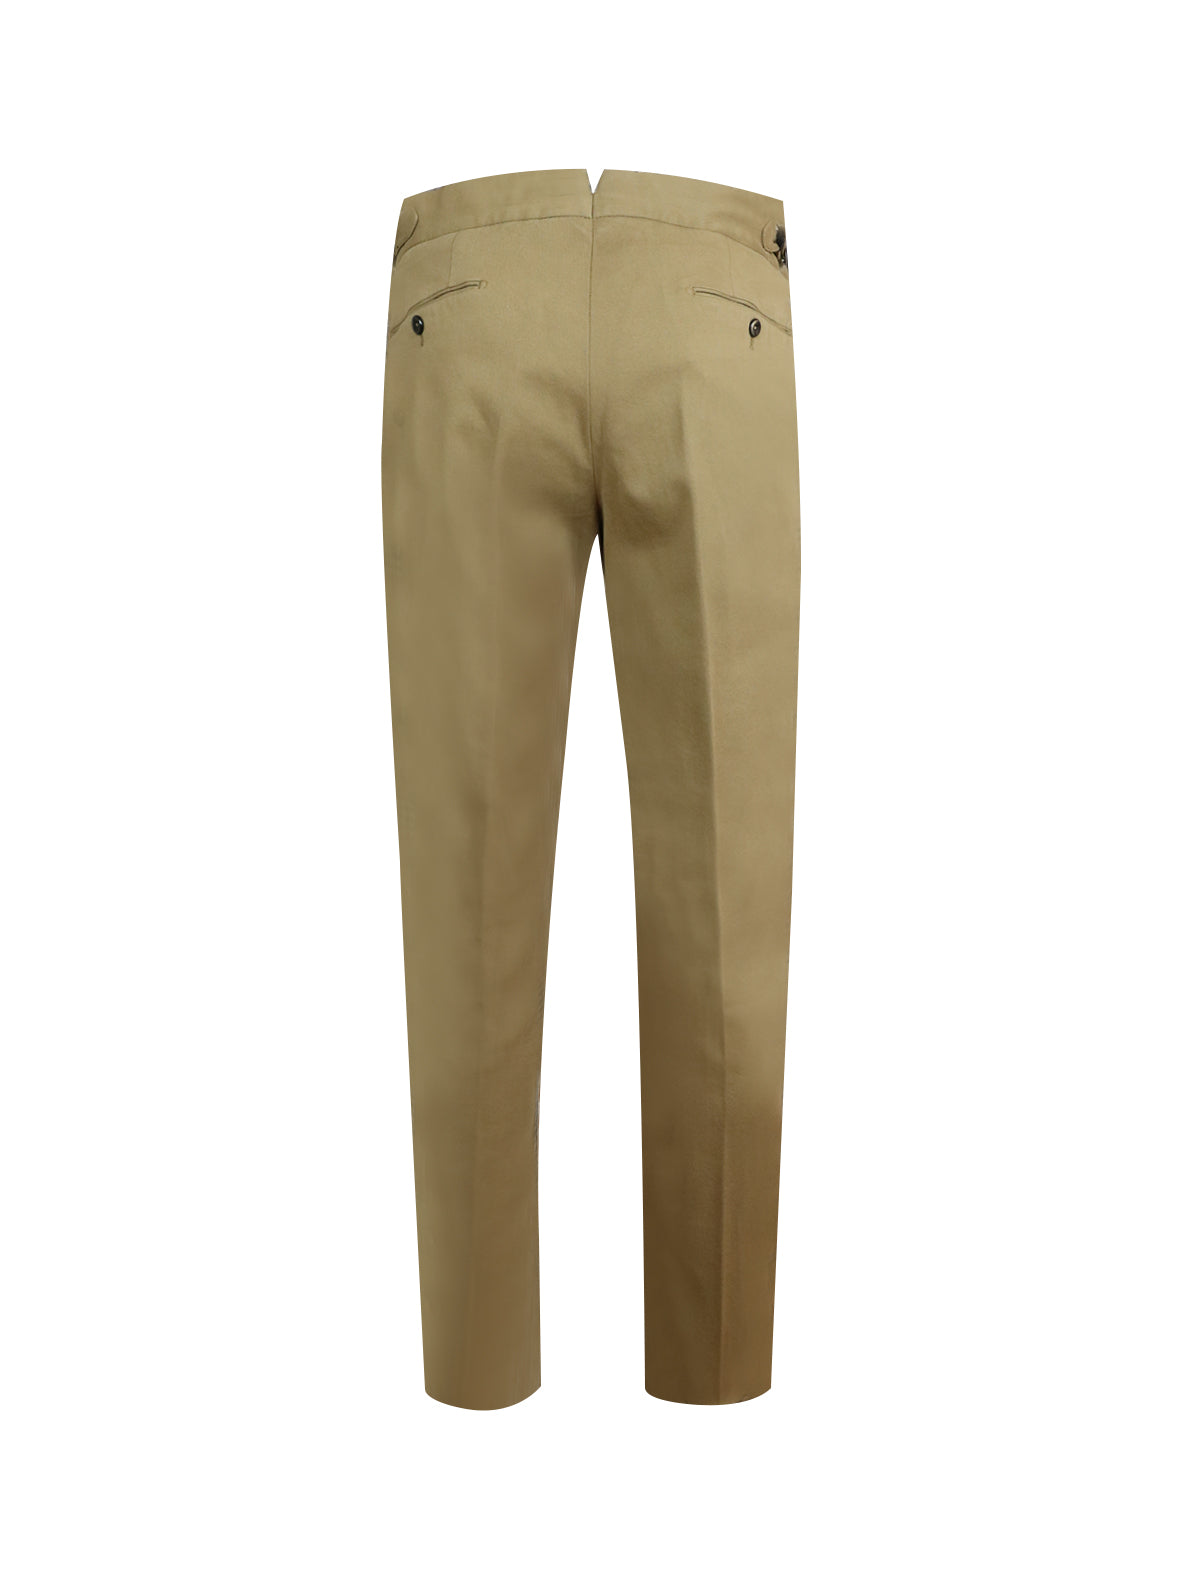 PT Torino Cotton Tapered Trouser in Camel